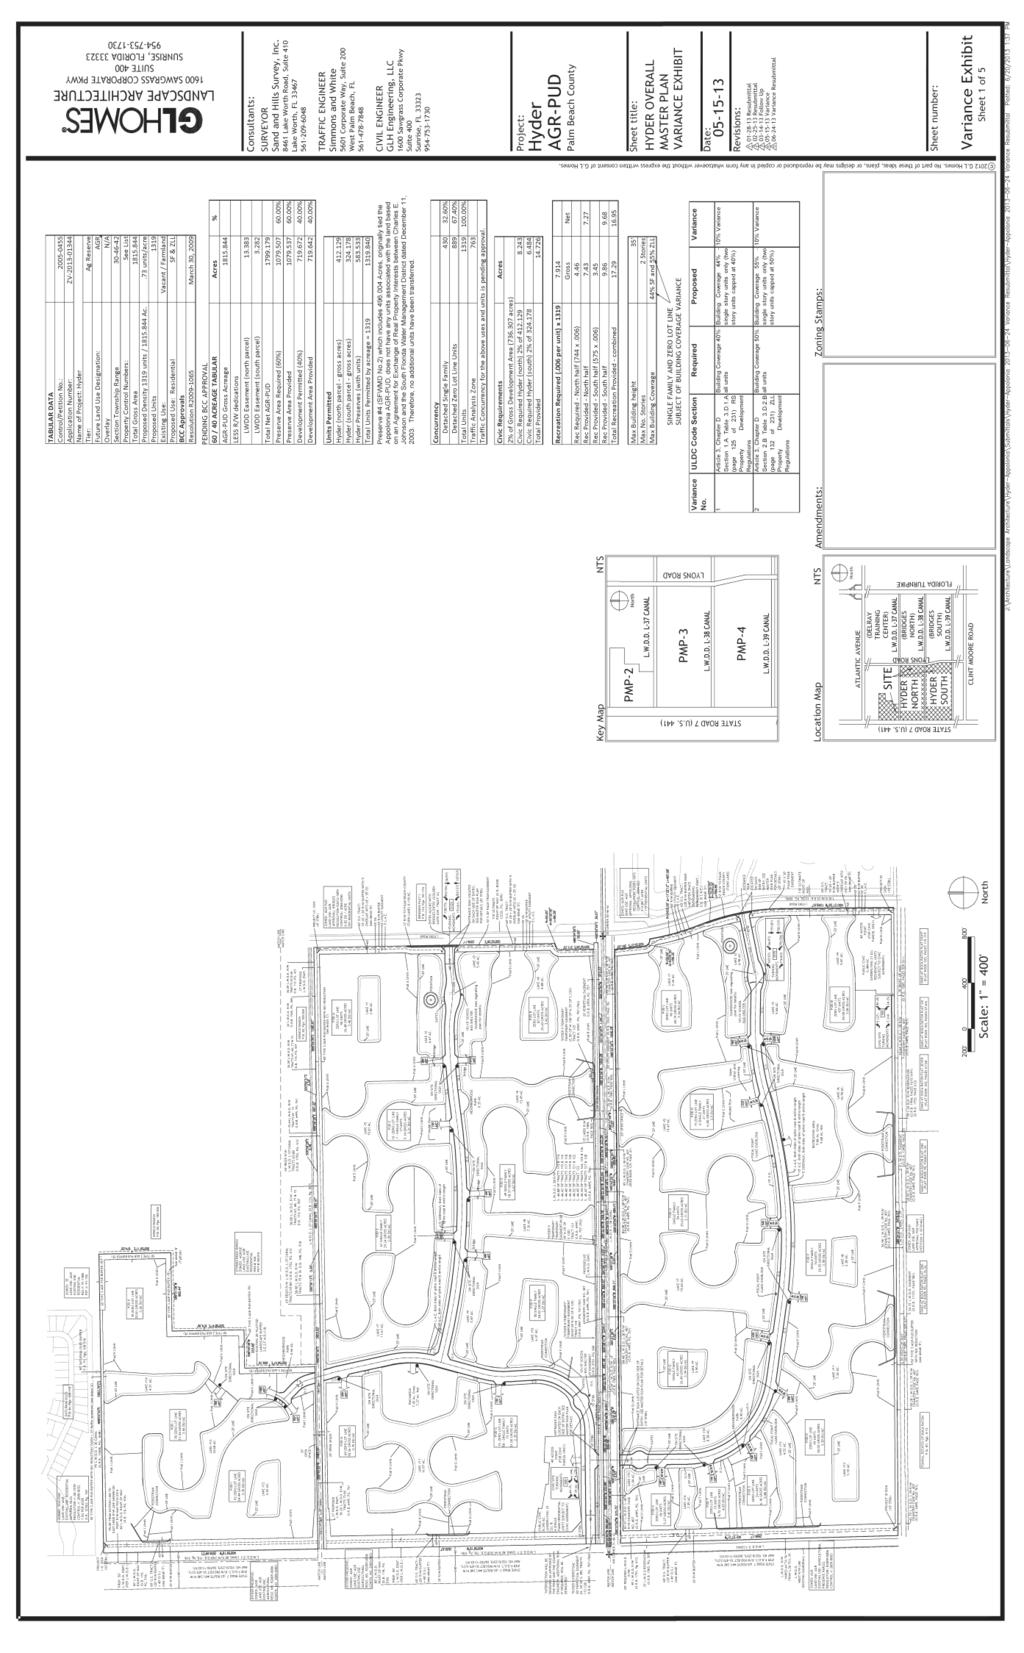 Figure 2 Preliminary Master Plan dated